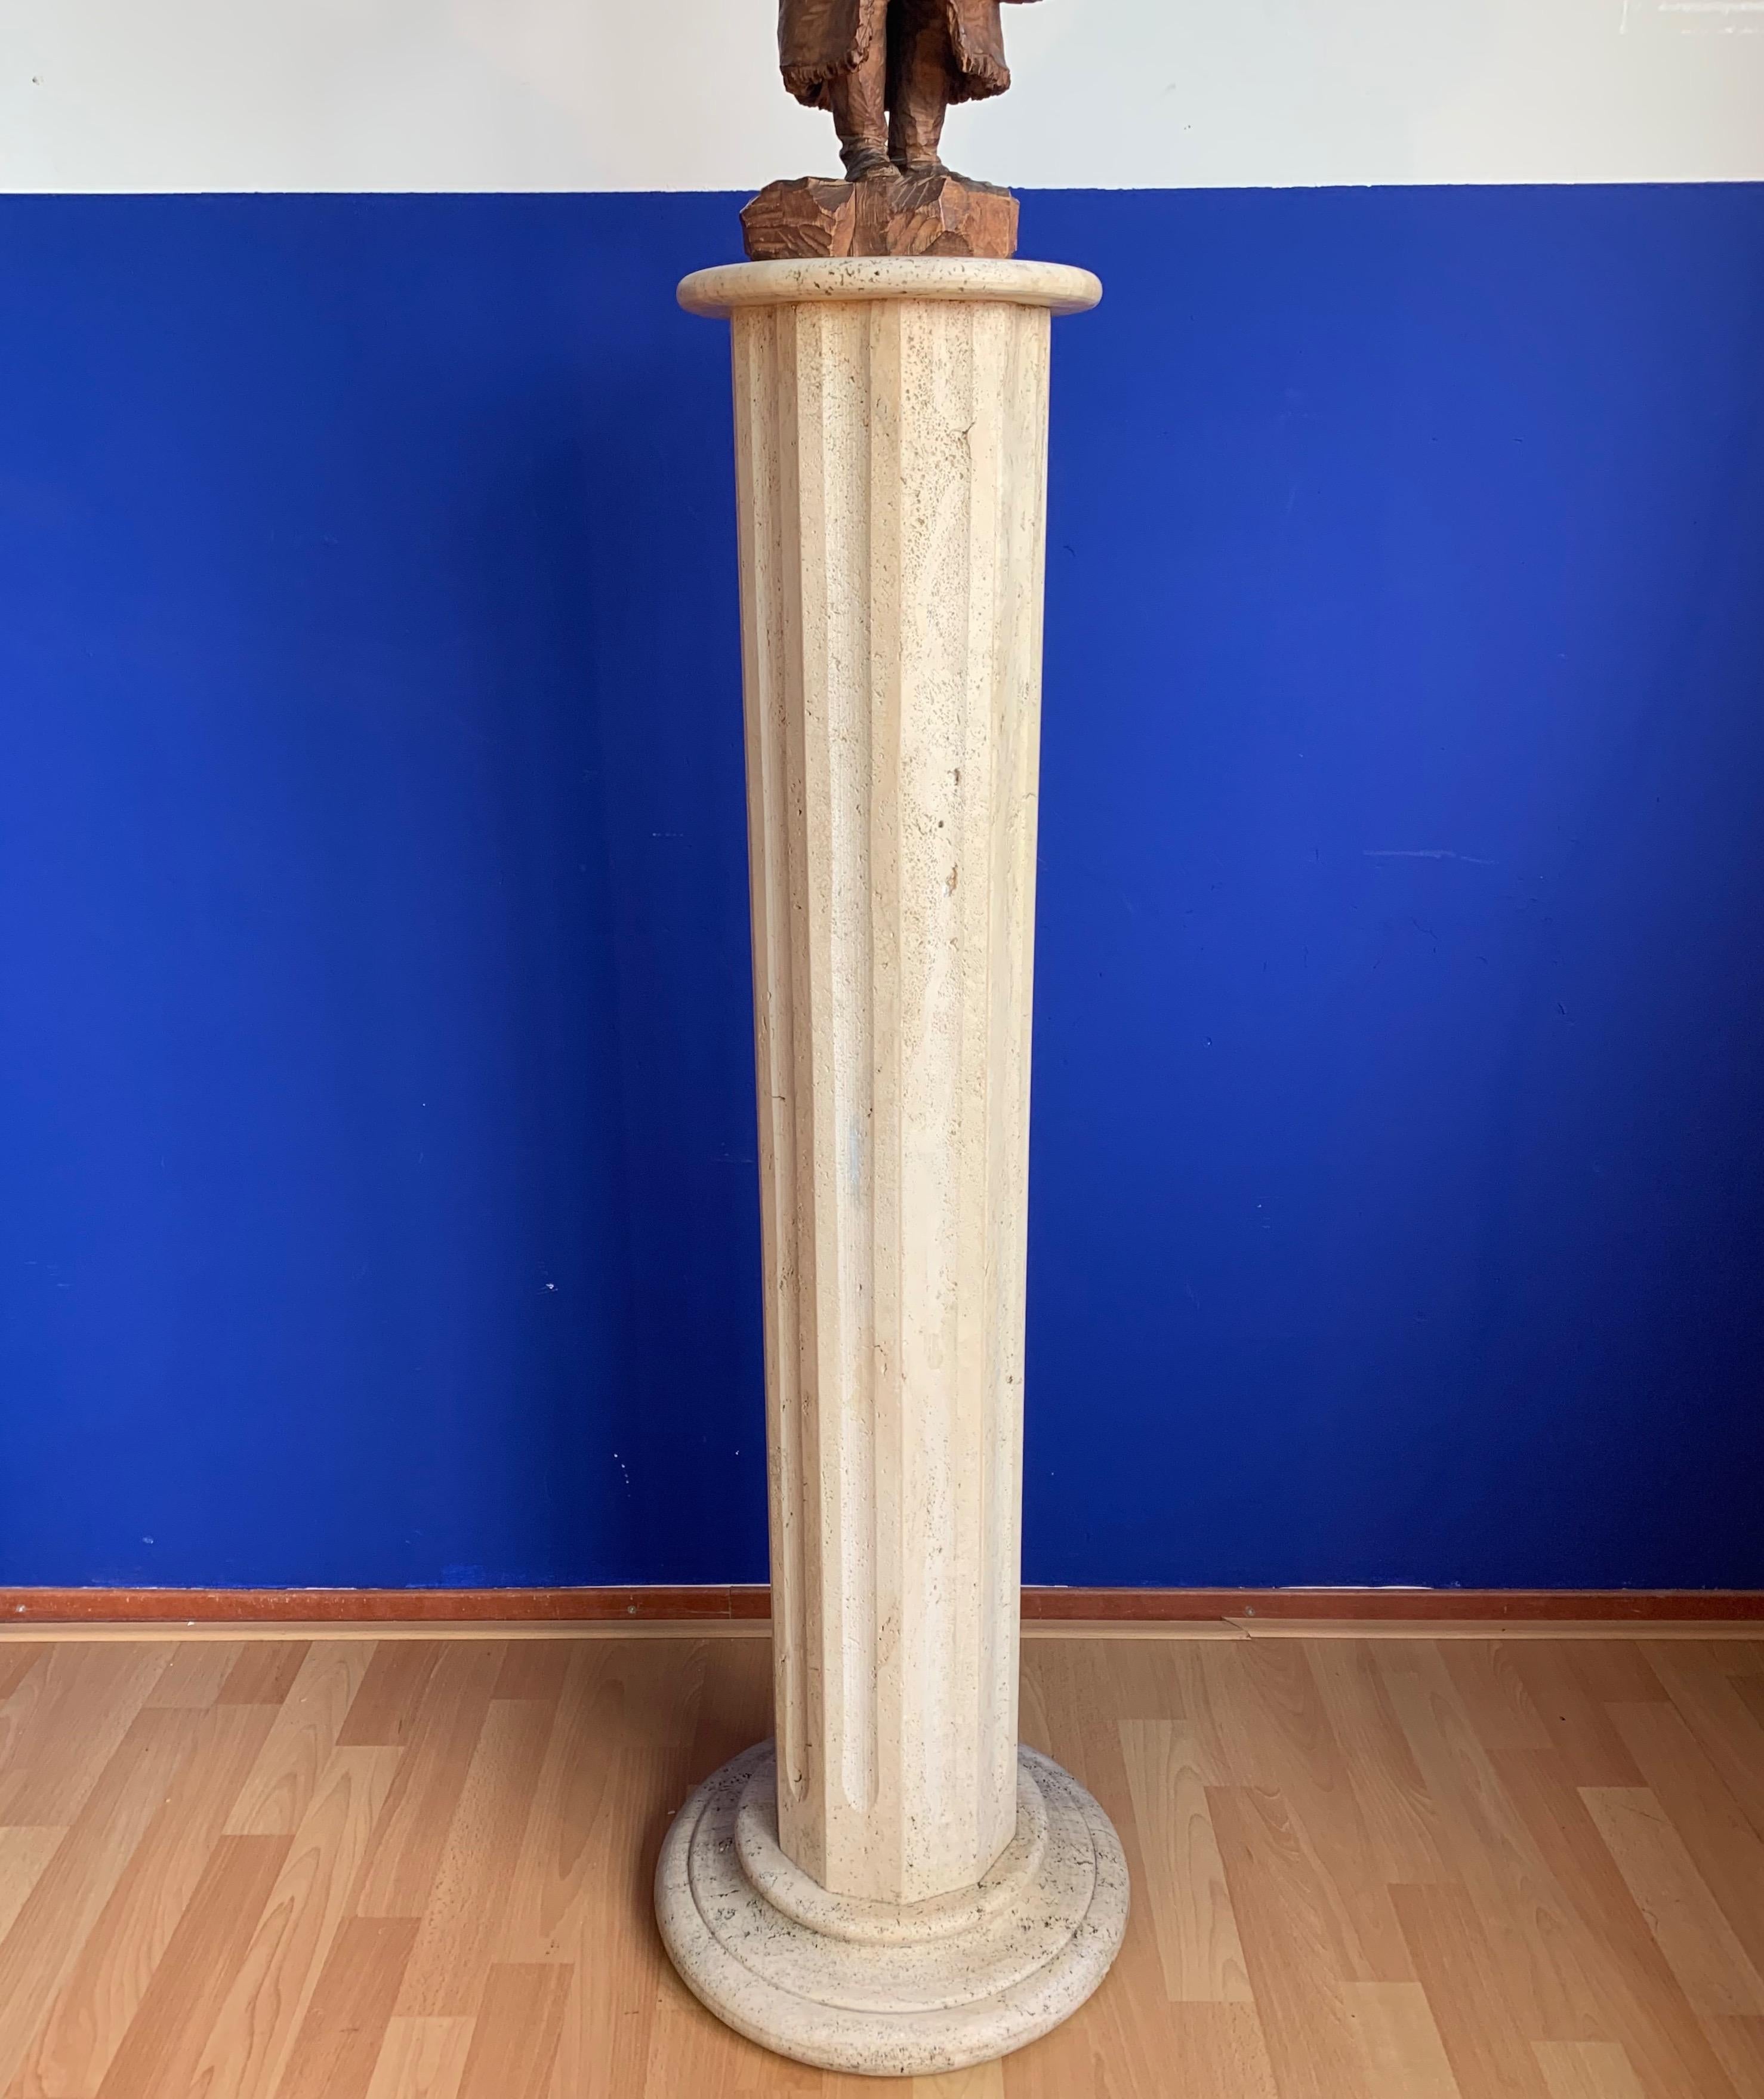 Wonderful column for displaying works of art.

This vintage and classical design display pedestal (for both indoors and outdoors) is perfect for showcasing an antique or modern sculpture, bust, vase etc. The slight wear, the shape and the wonderful